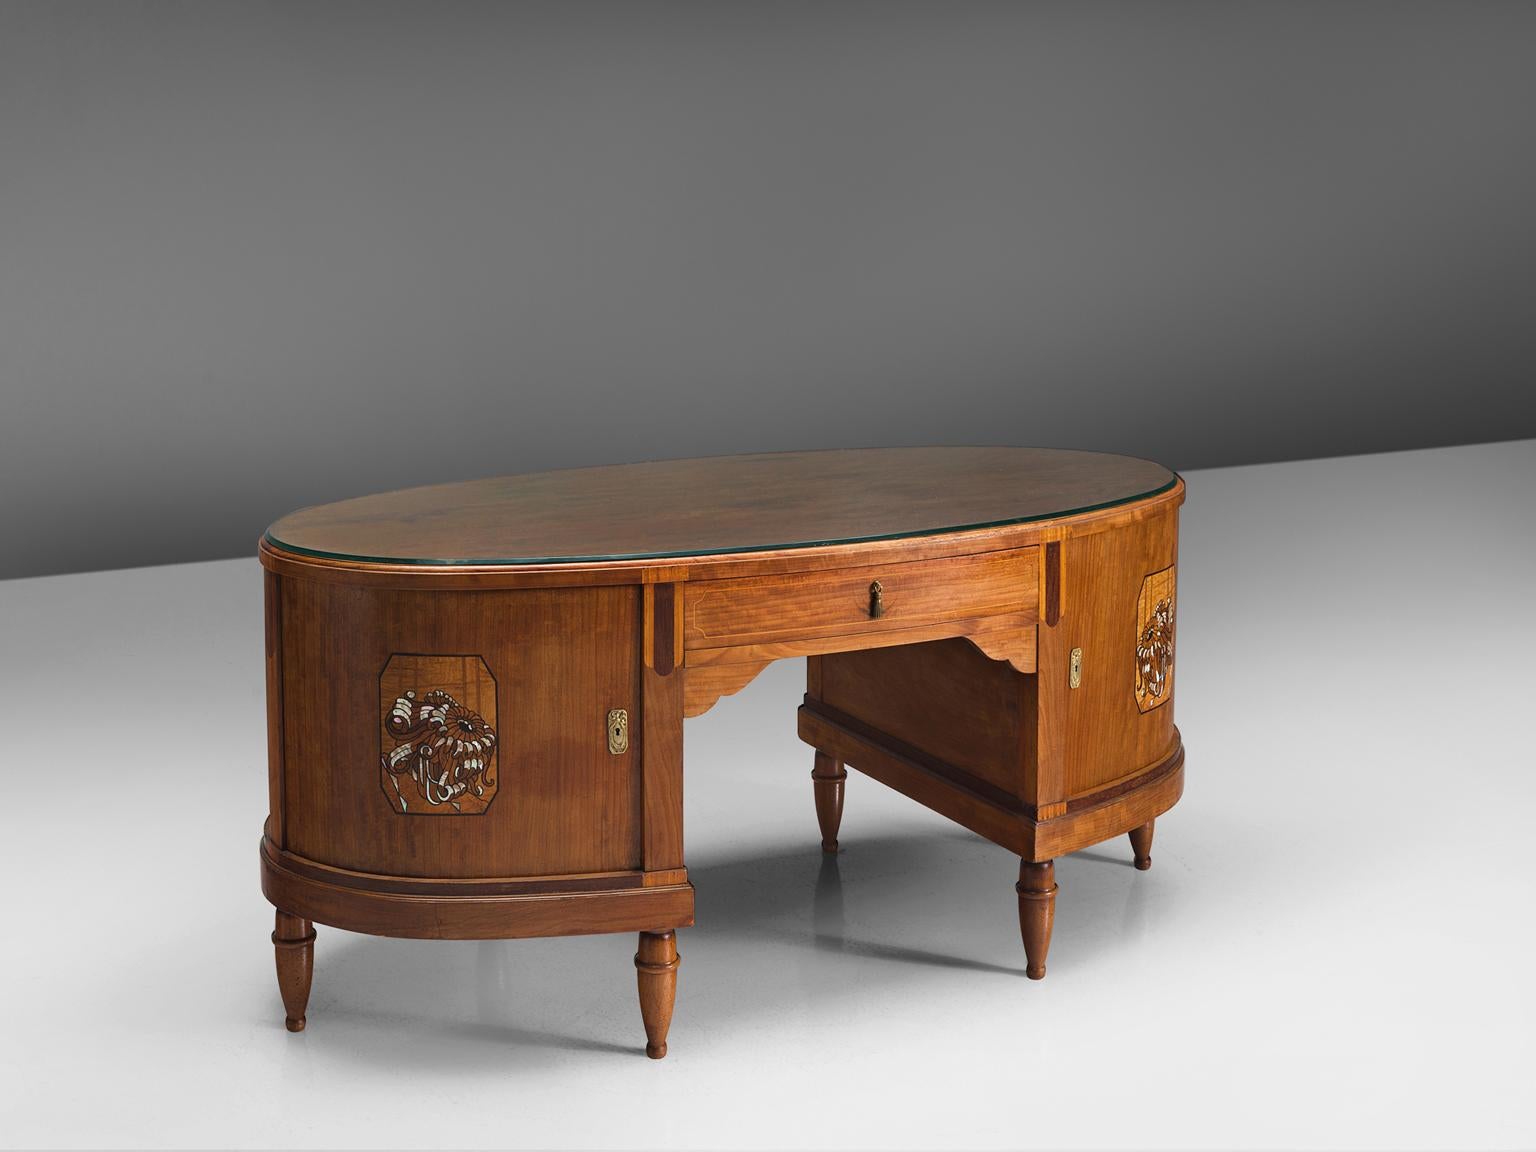 Desk, in mahogany, mother-of-pearl and brass, France, 1930s. 

This mahogany Art Deco executive desk has a front and back that are identical, both equipped with a drawer and two curved doors. Each door has a beautifully made veneer and